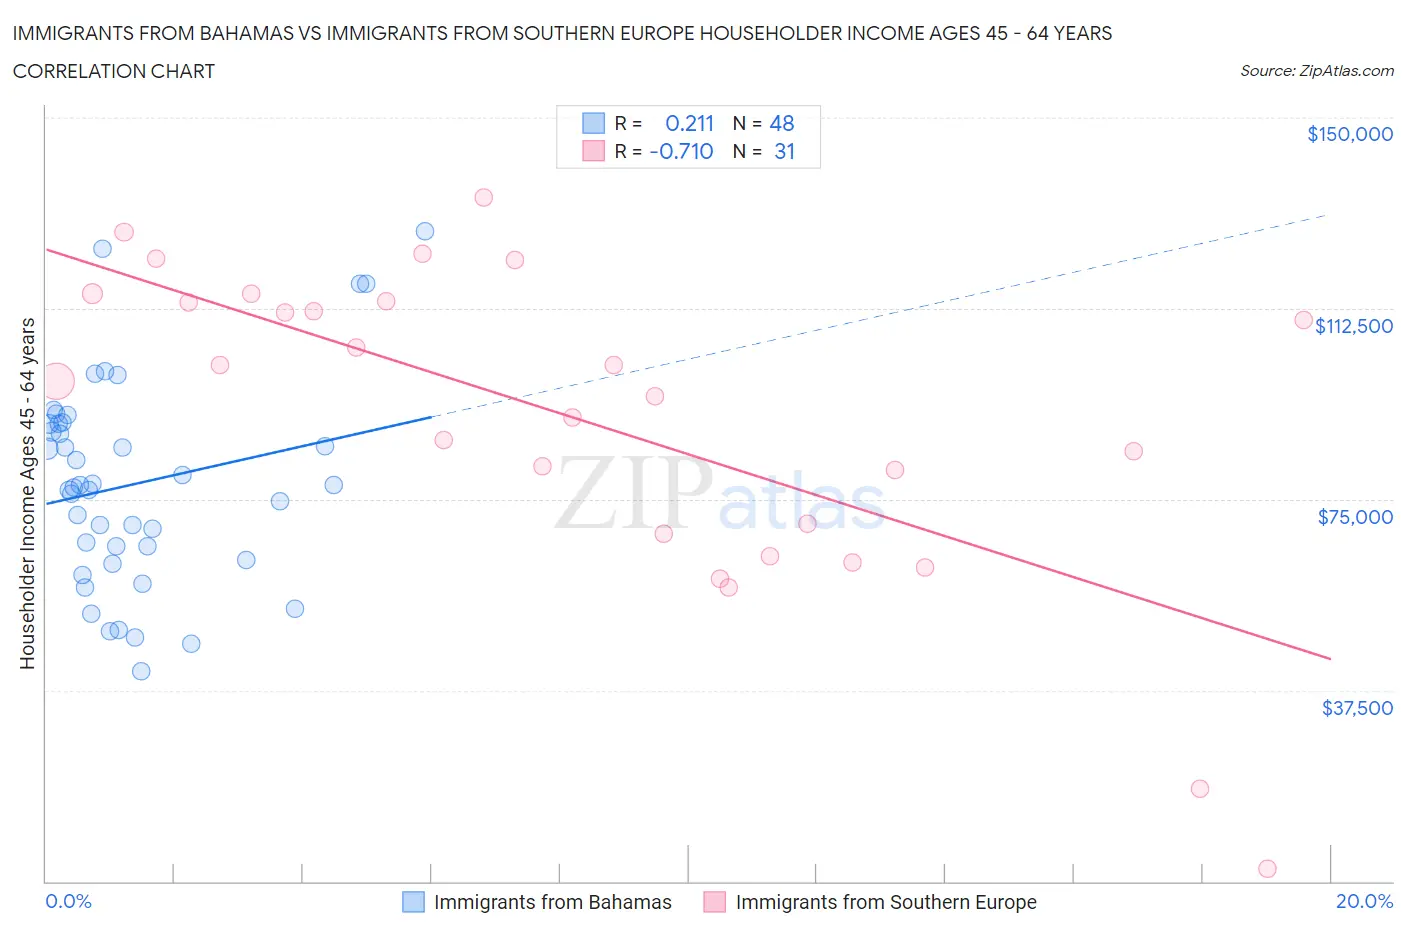 Immigrants from Bahamas vs Immigrants from Southern Europe Householder Income Ages 45 - 64 years